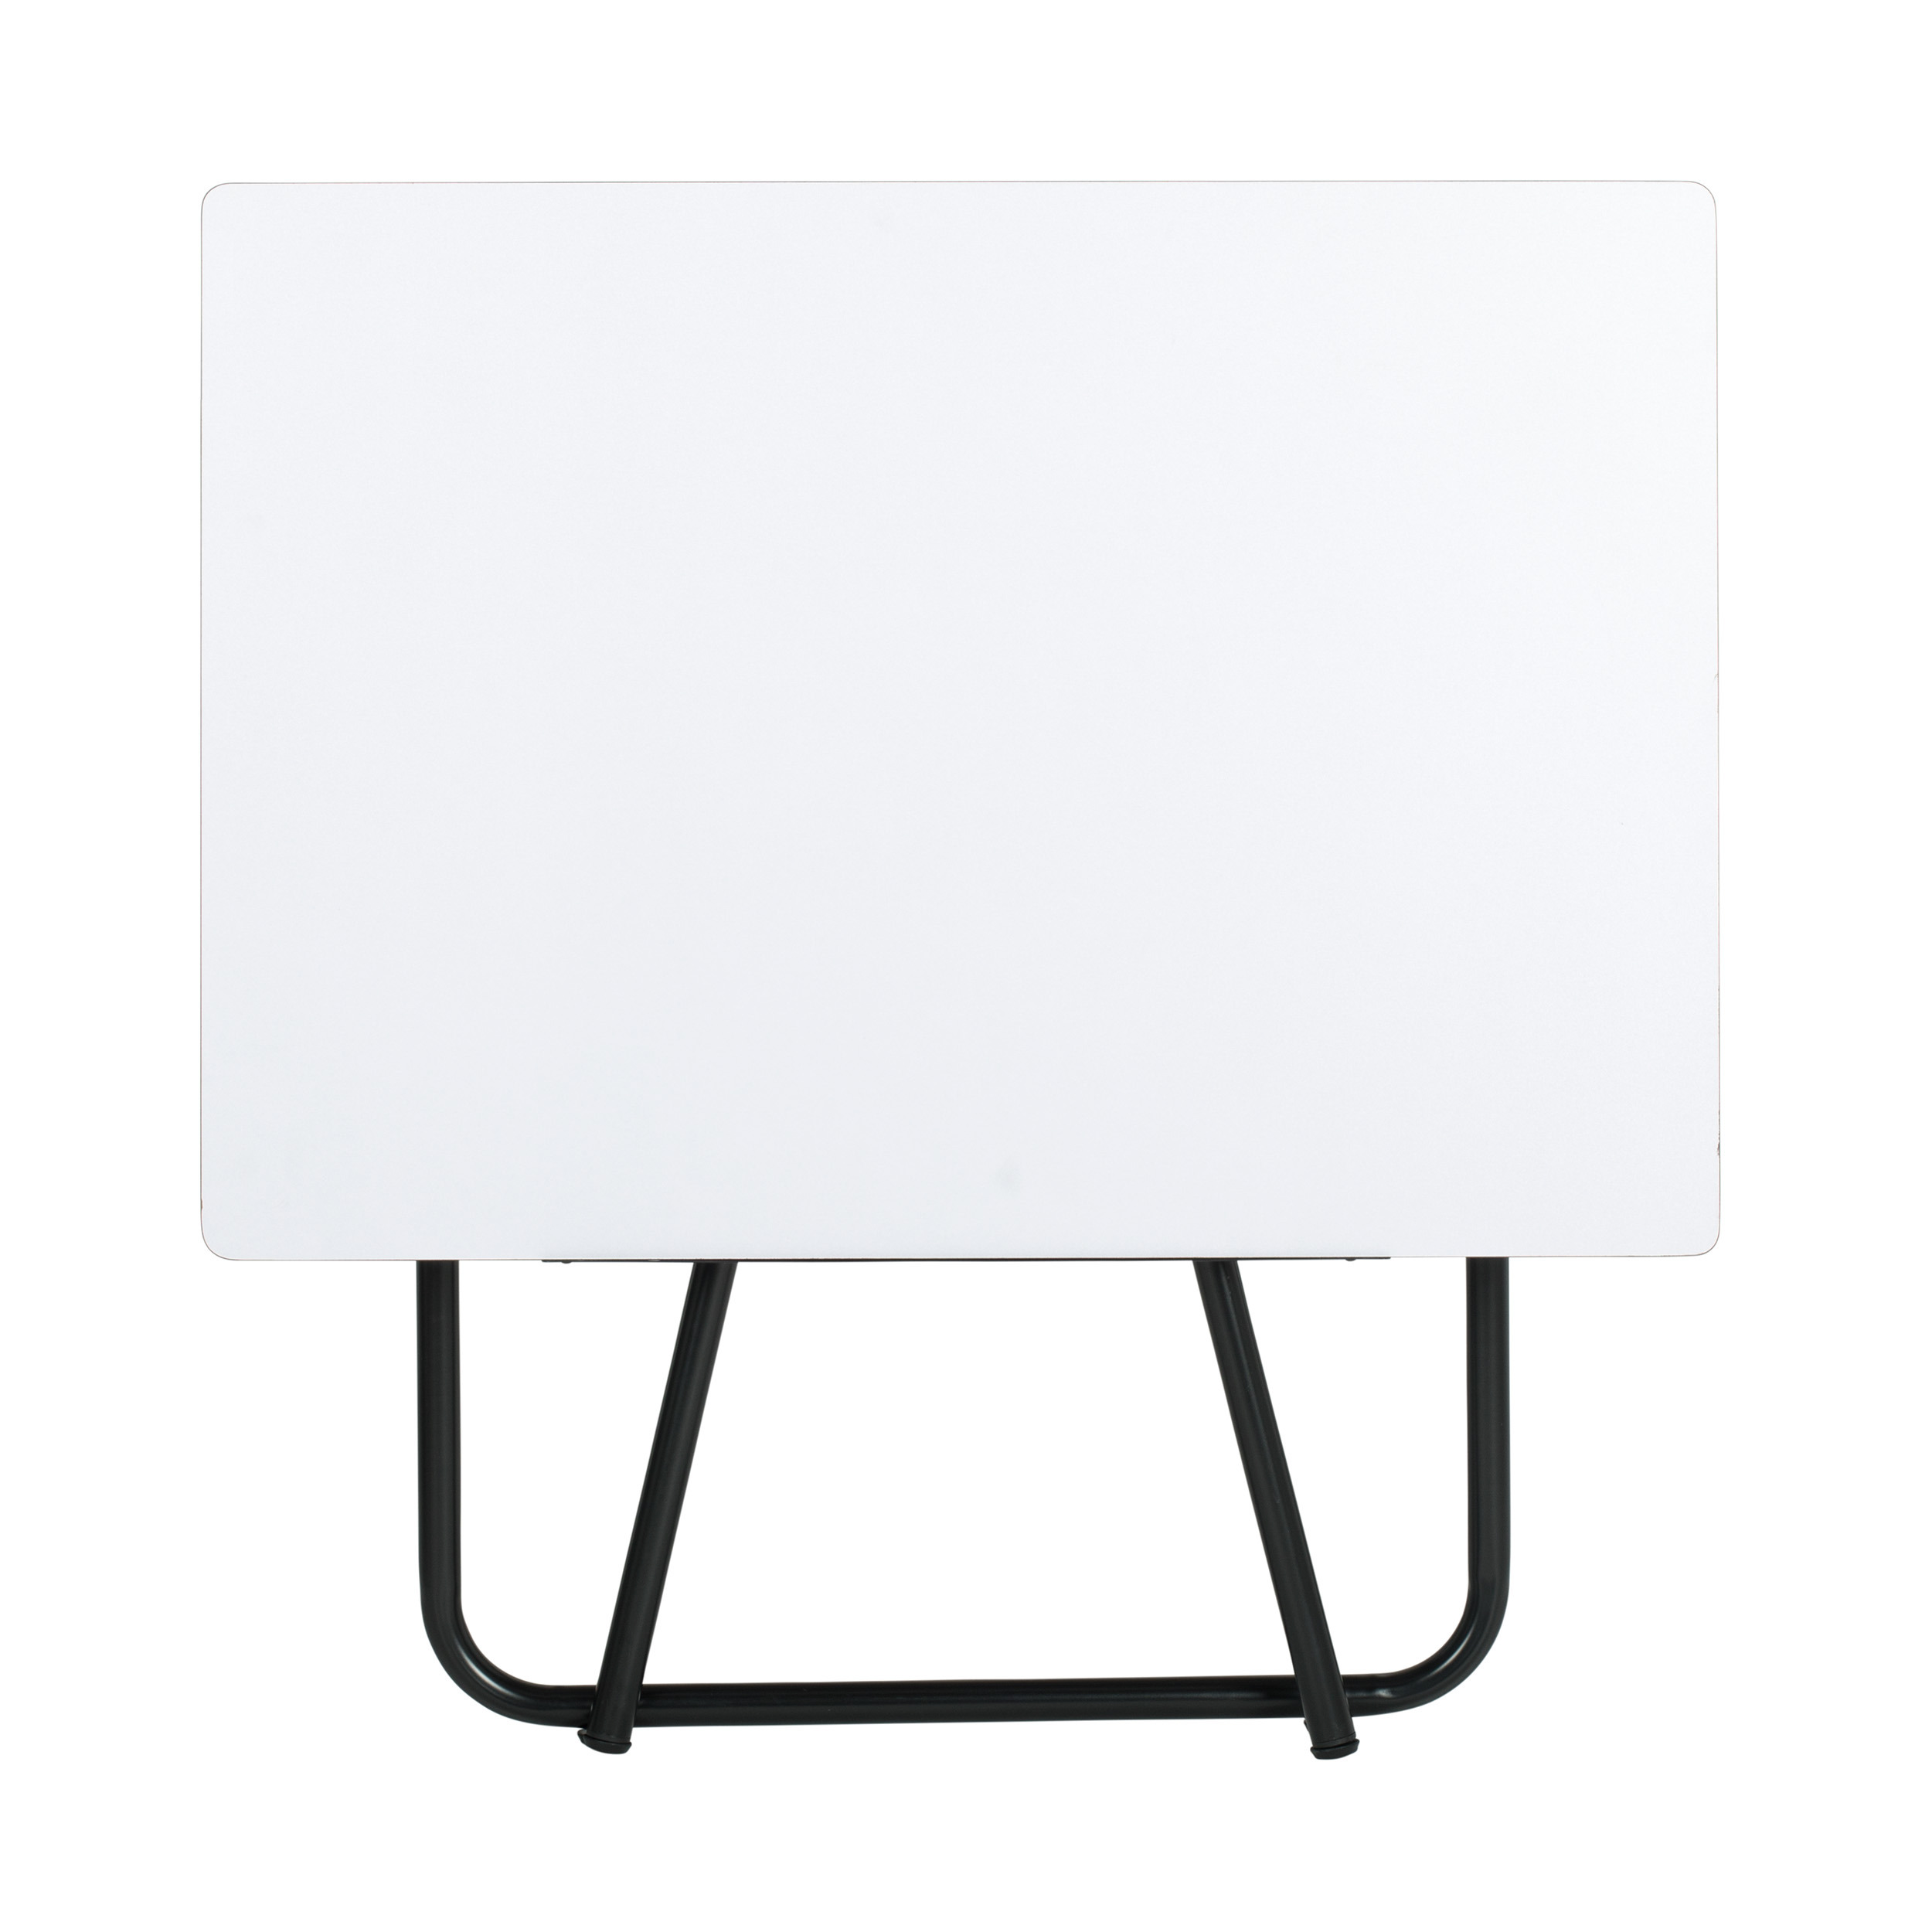 Studio Designs Ultima Drafting Table with Adjustable Fold-A-Way Base and 42"x 30" Top - image 3 of 14